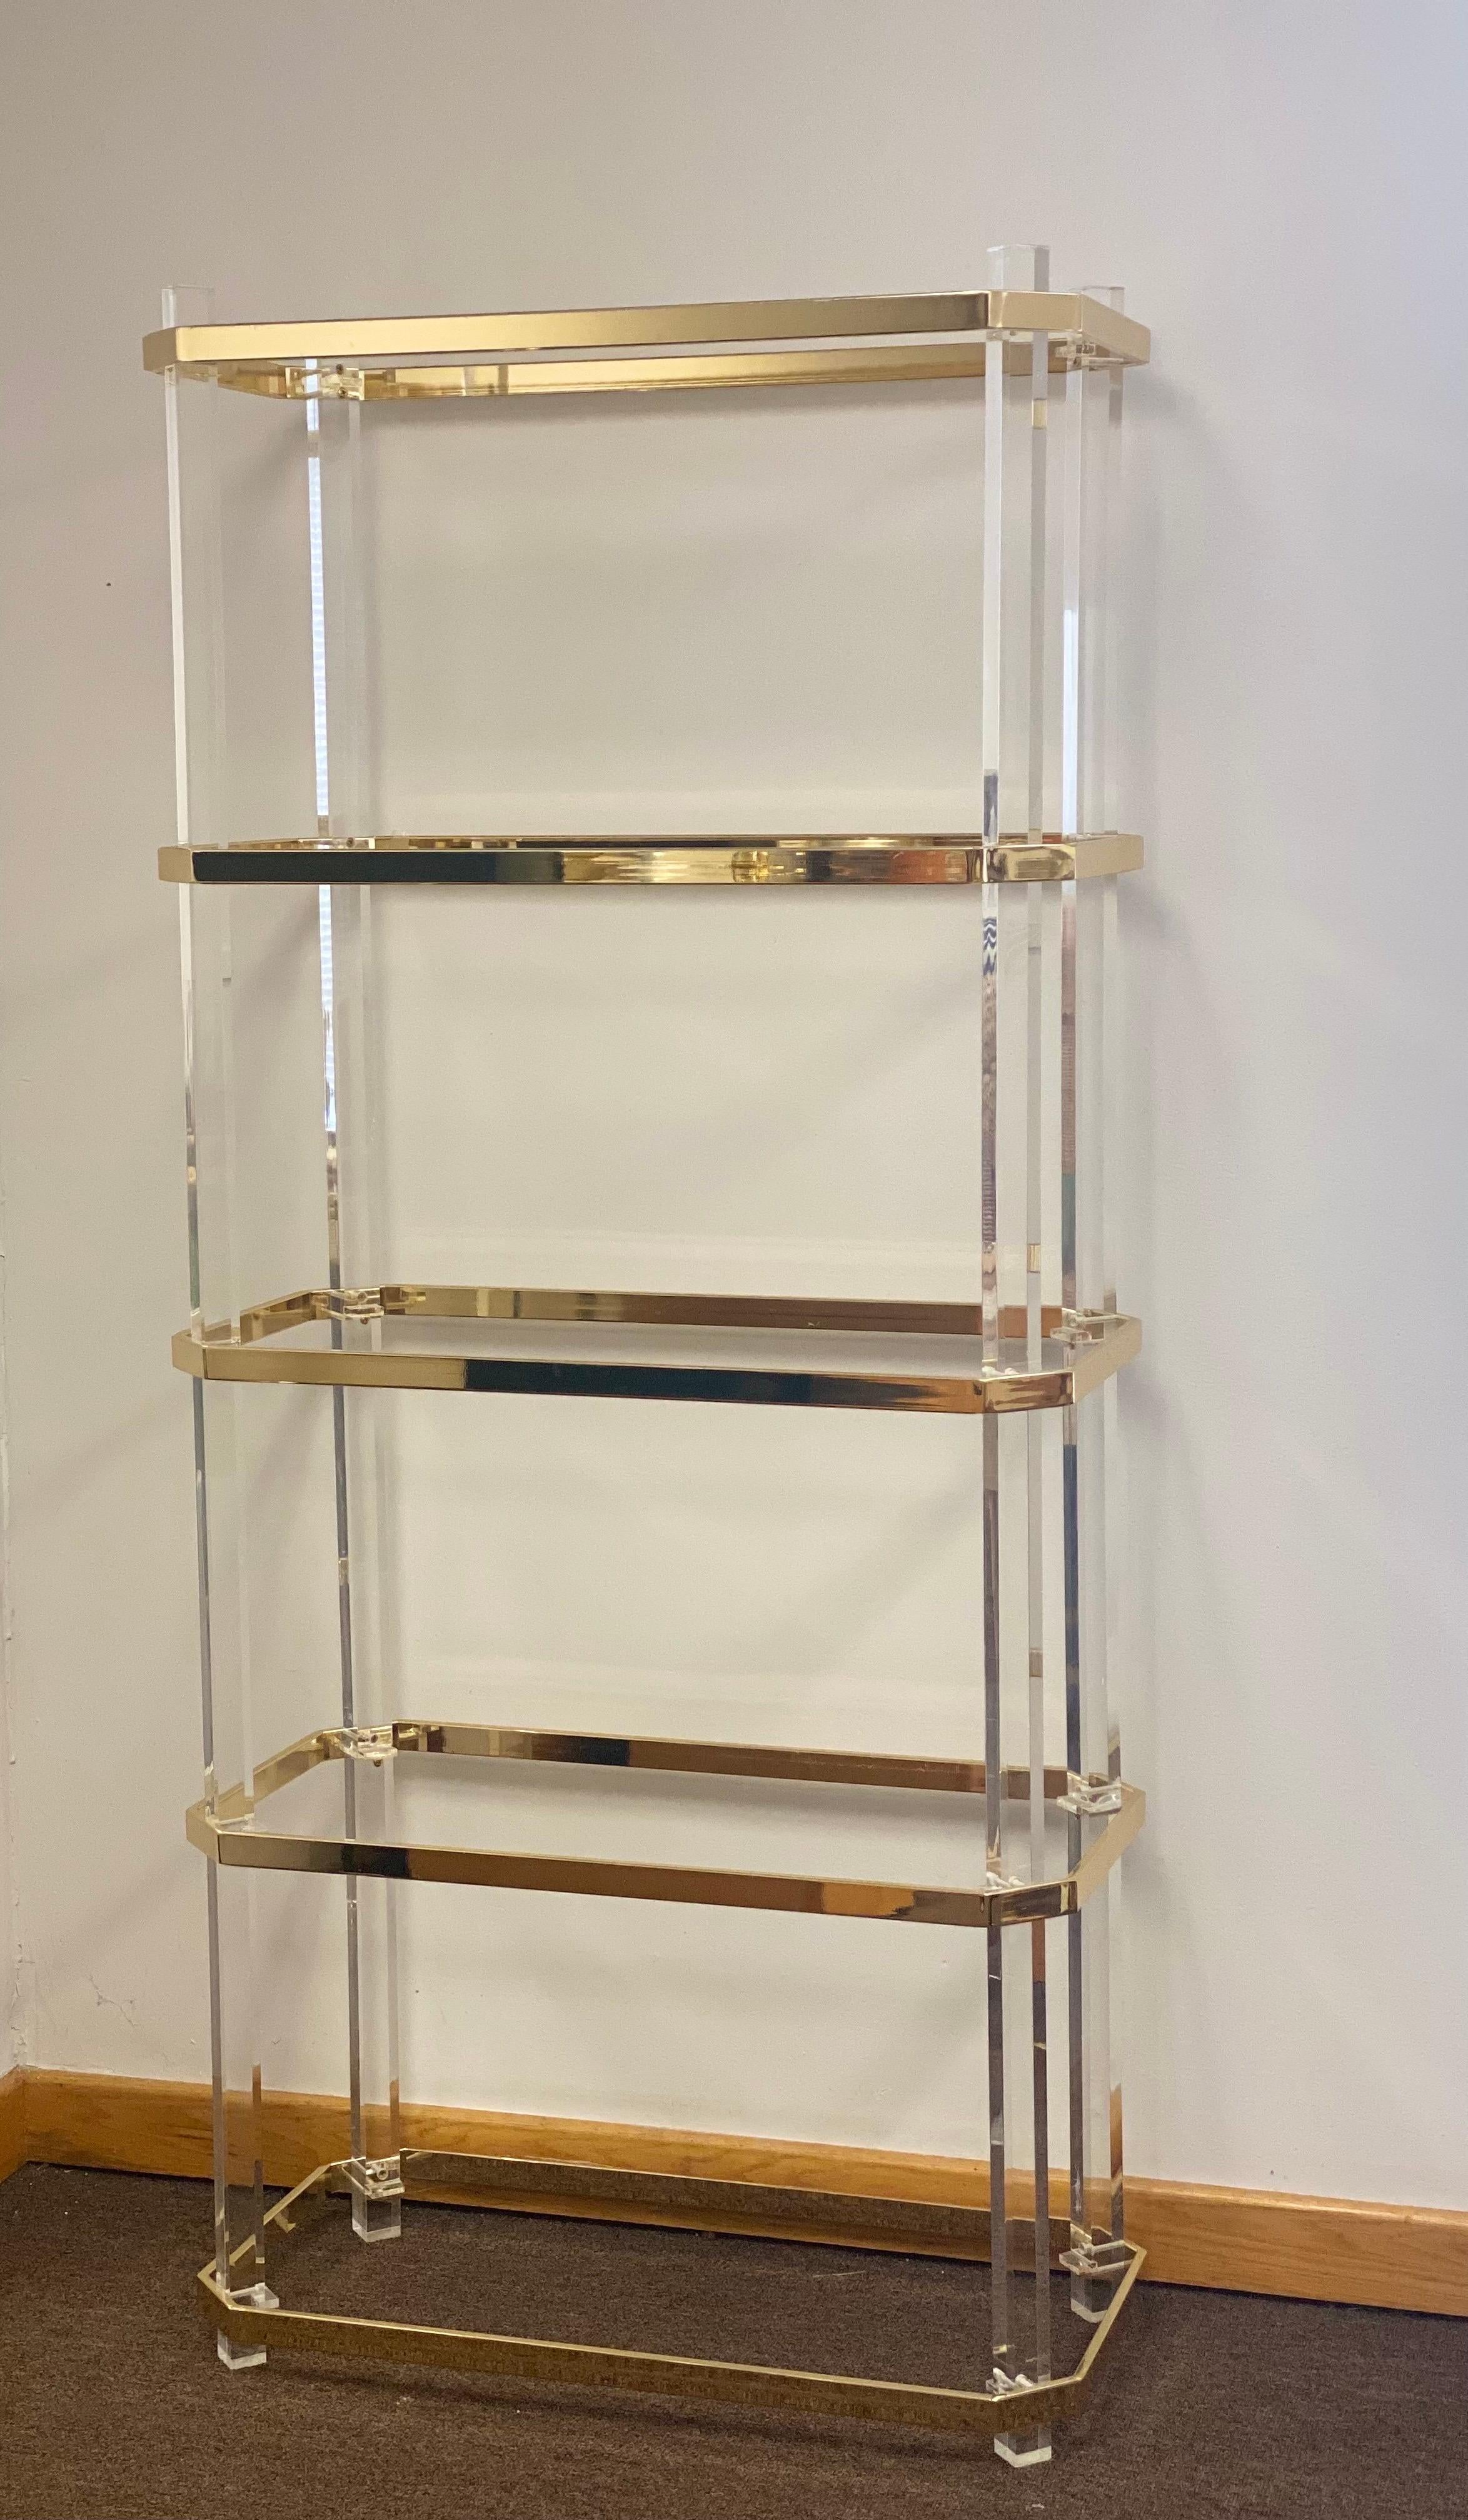 We are very pleased to offer a stunning etagere, circa the 1970s. Beautiful clear Lucite, polished brass and clear glass come together to form a streamlined piece for storage and display. Perfect for any décor due to its blend of simplicity and